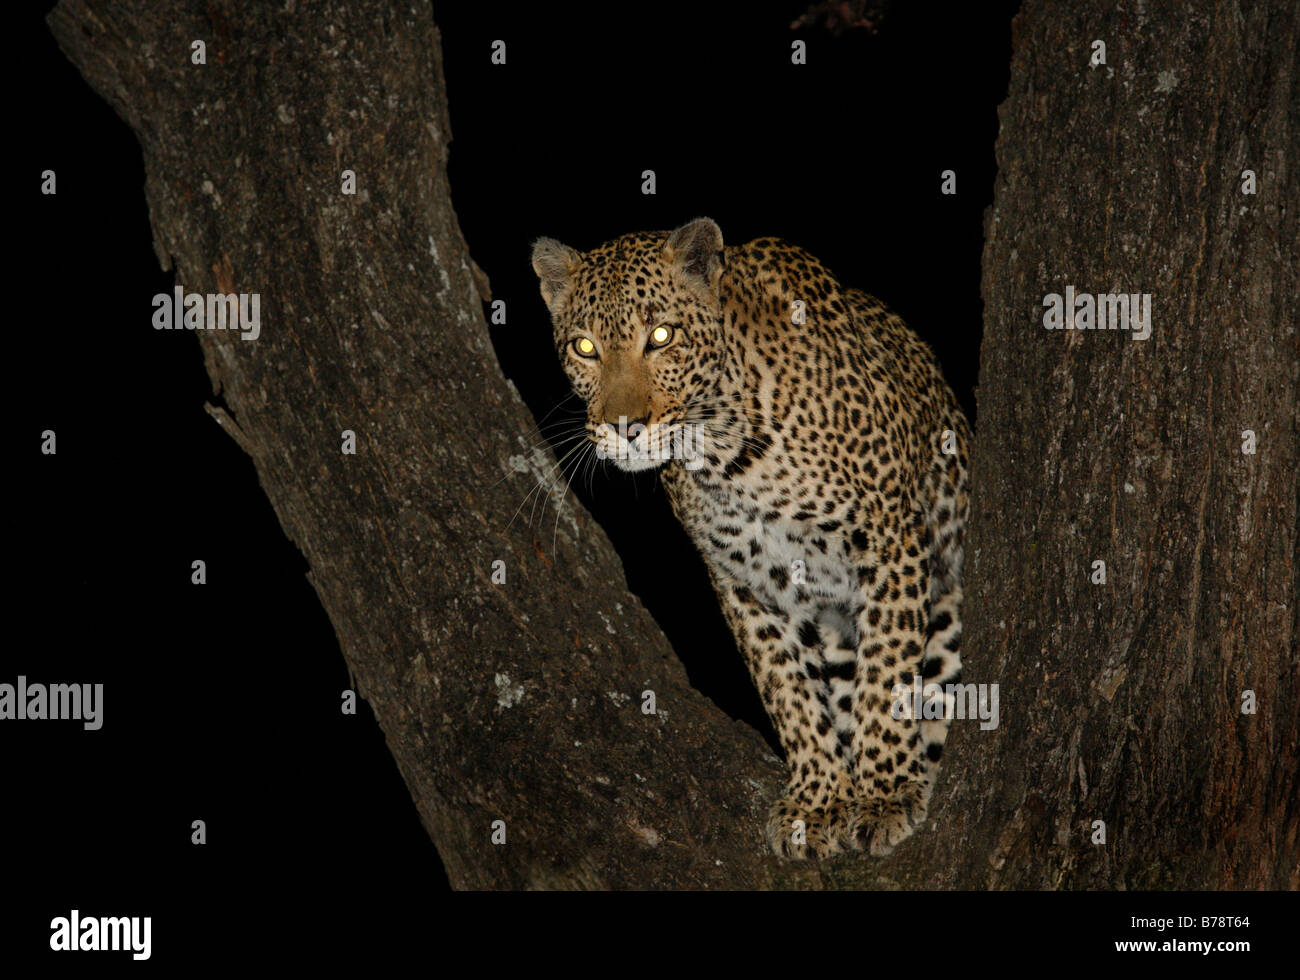 Frontal view of a leopard in the fork of a tree at night Stock Photo